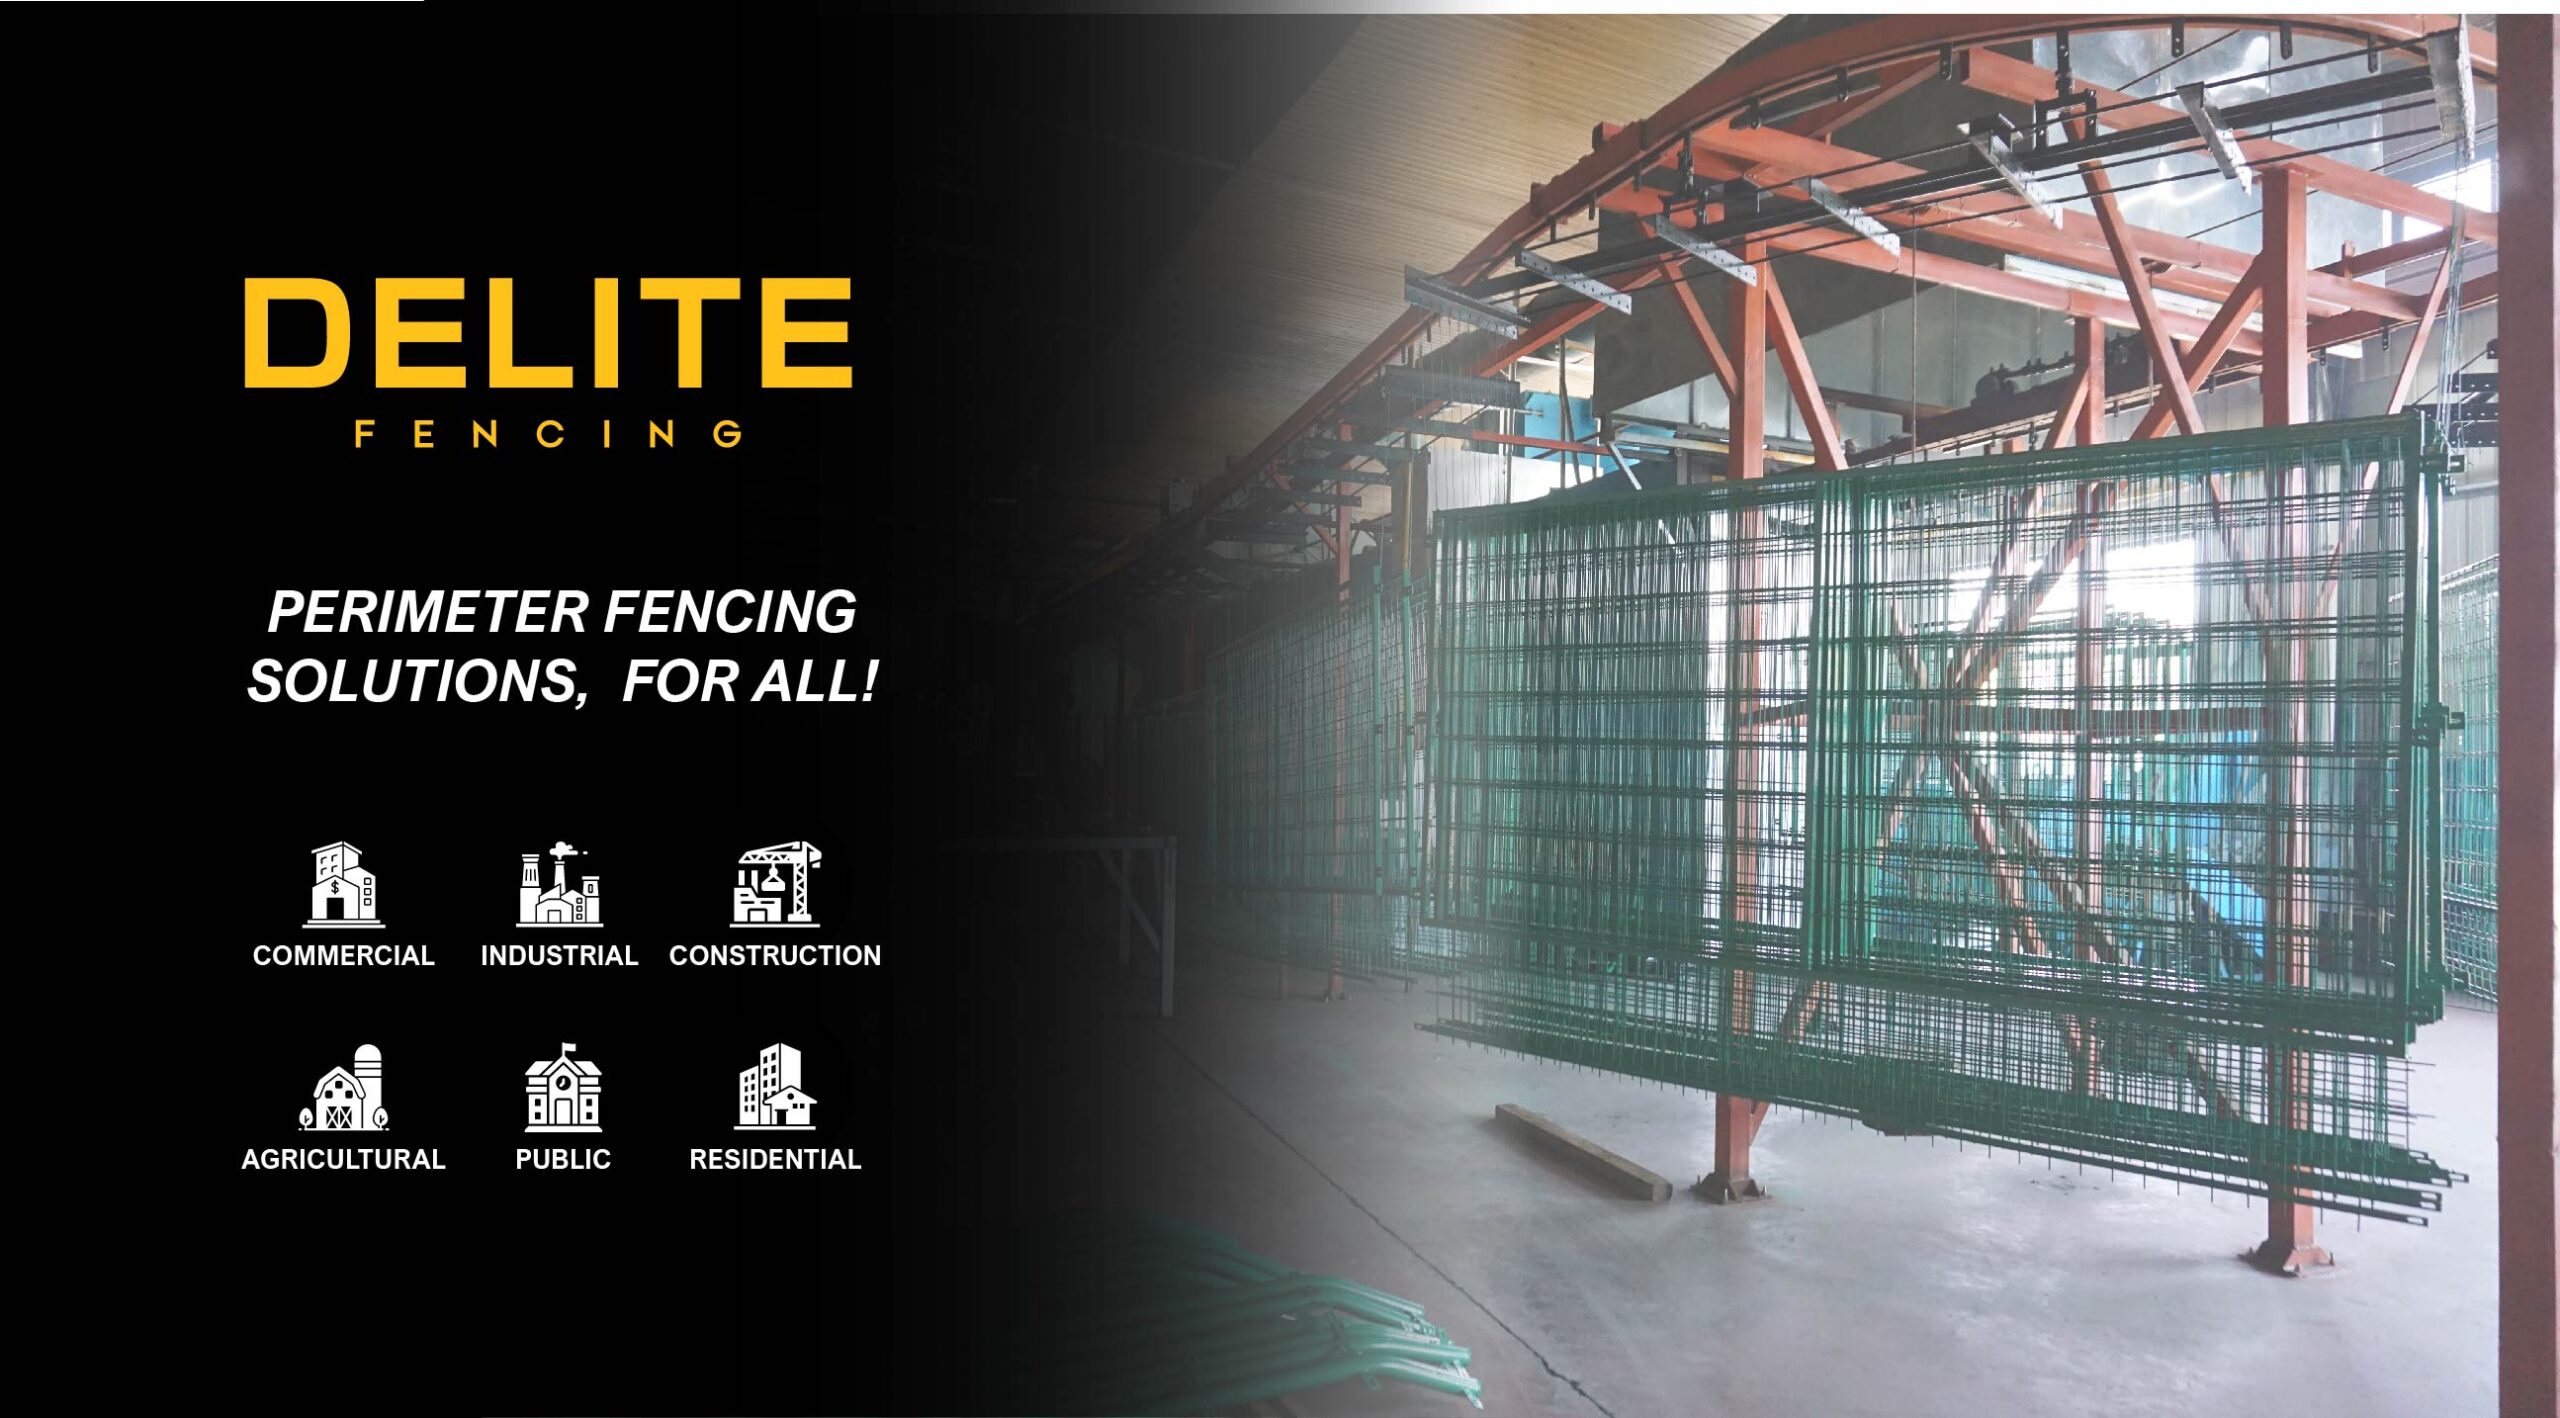 Quality Fence Products | Quality Fence Company | DELITE